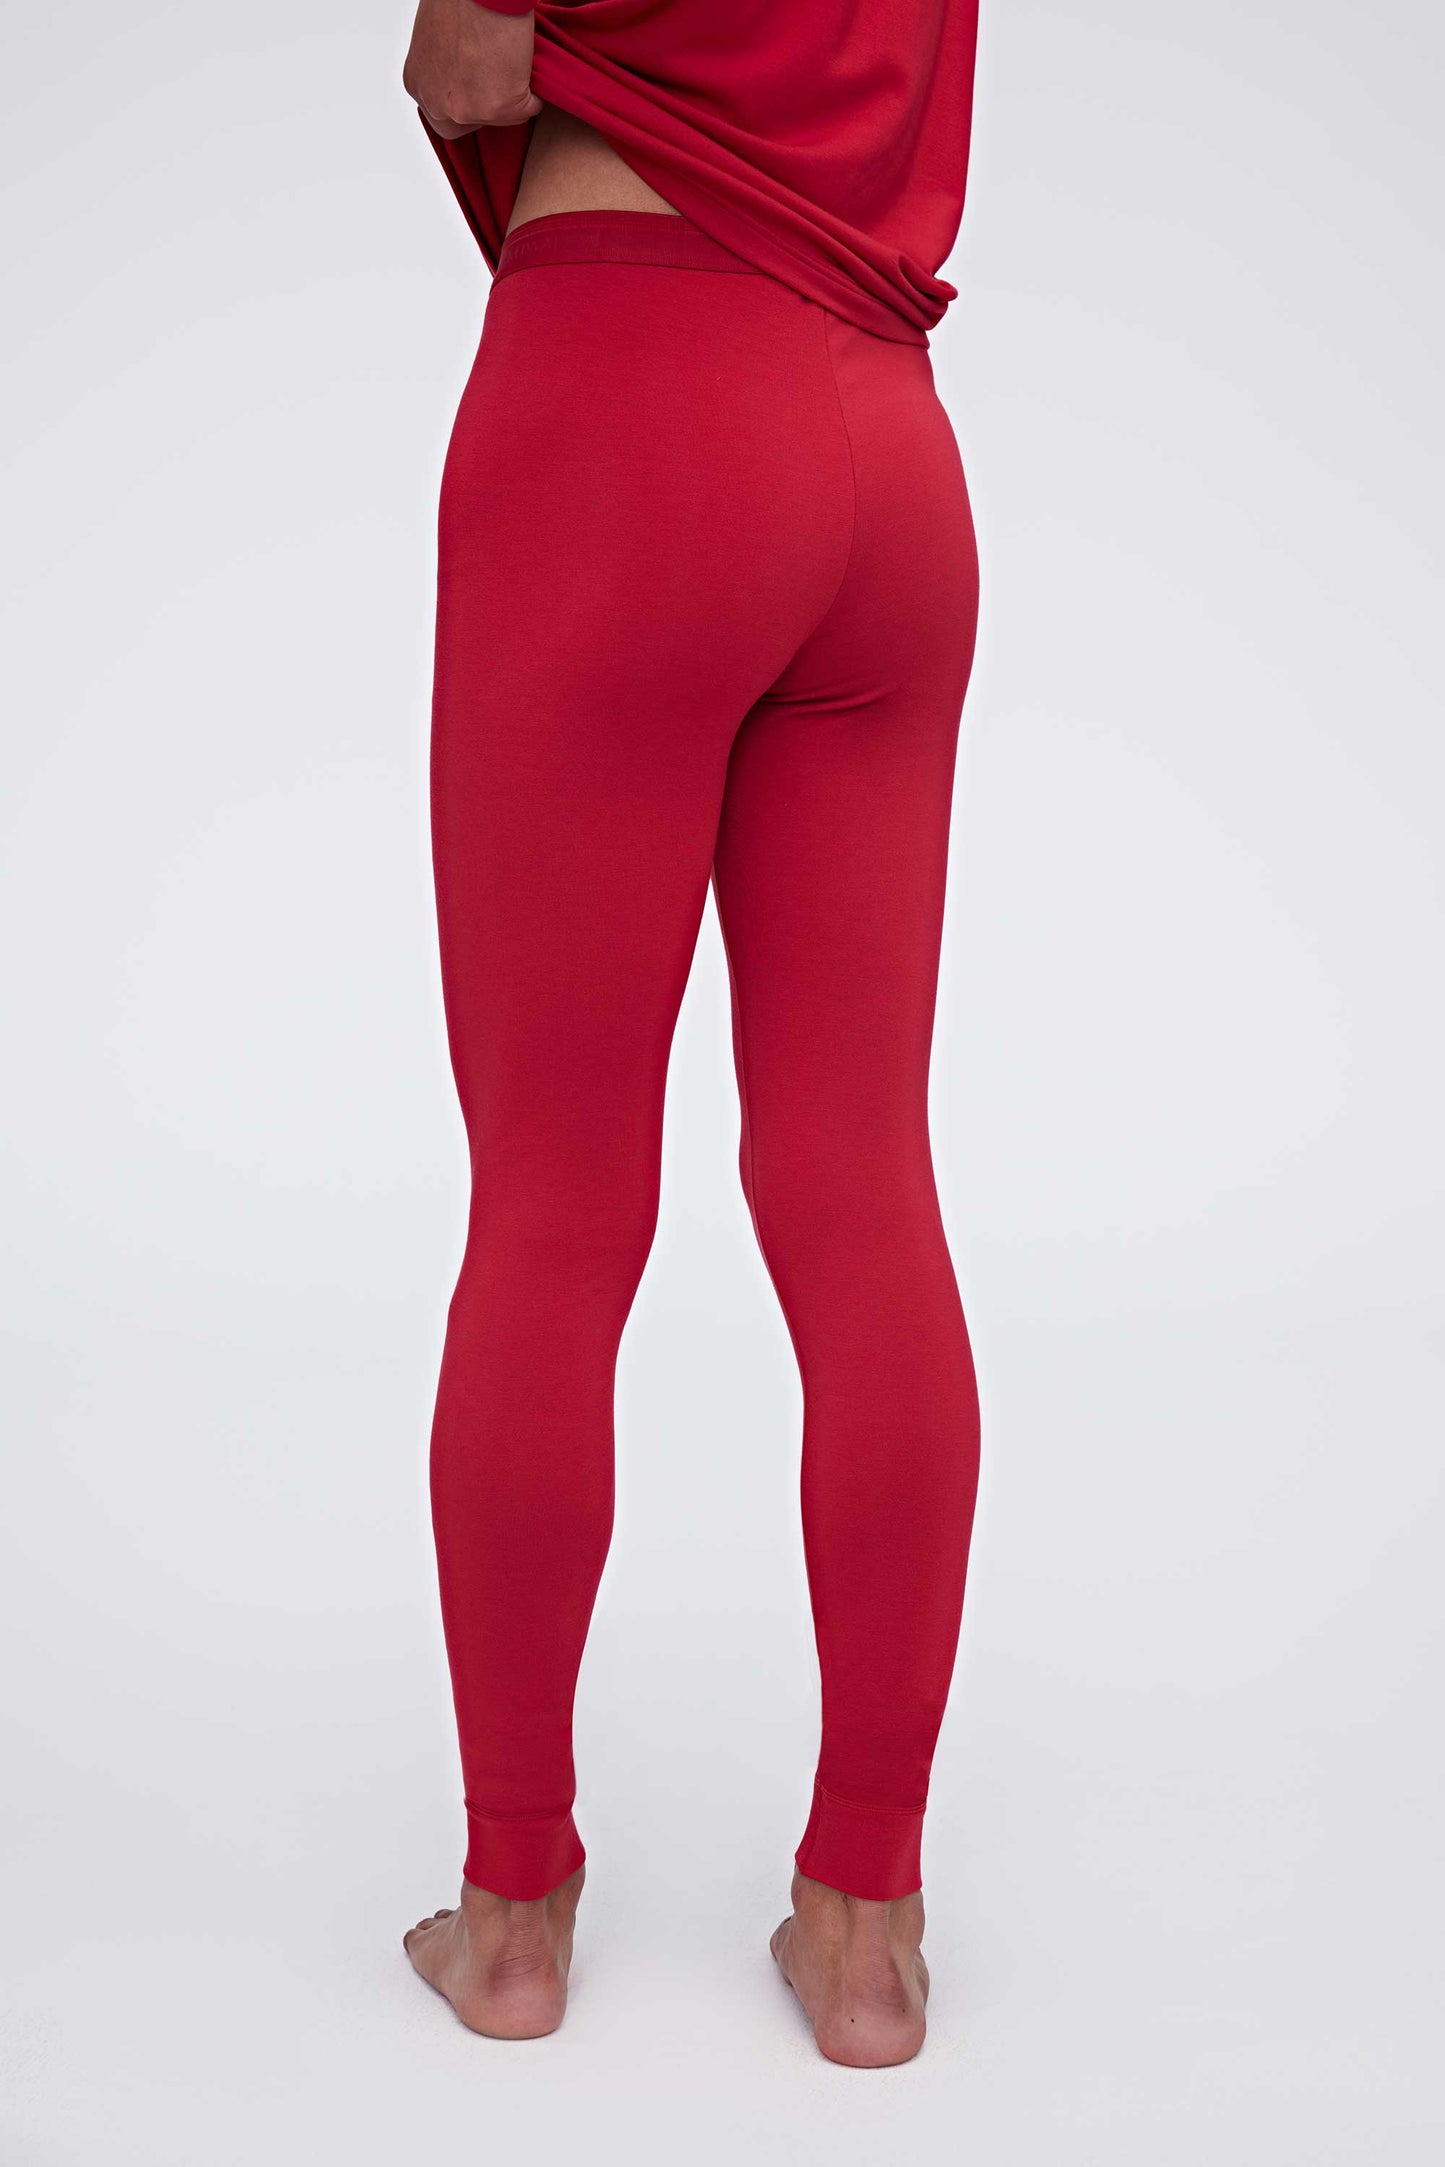 The back of the red thermal pants